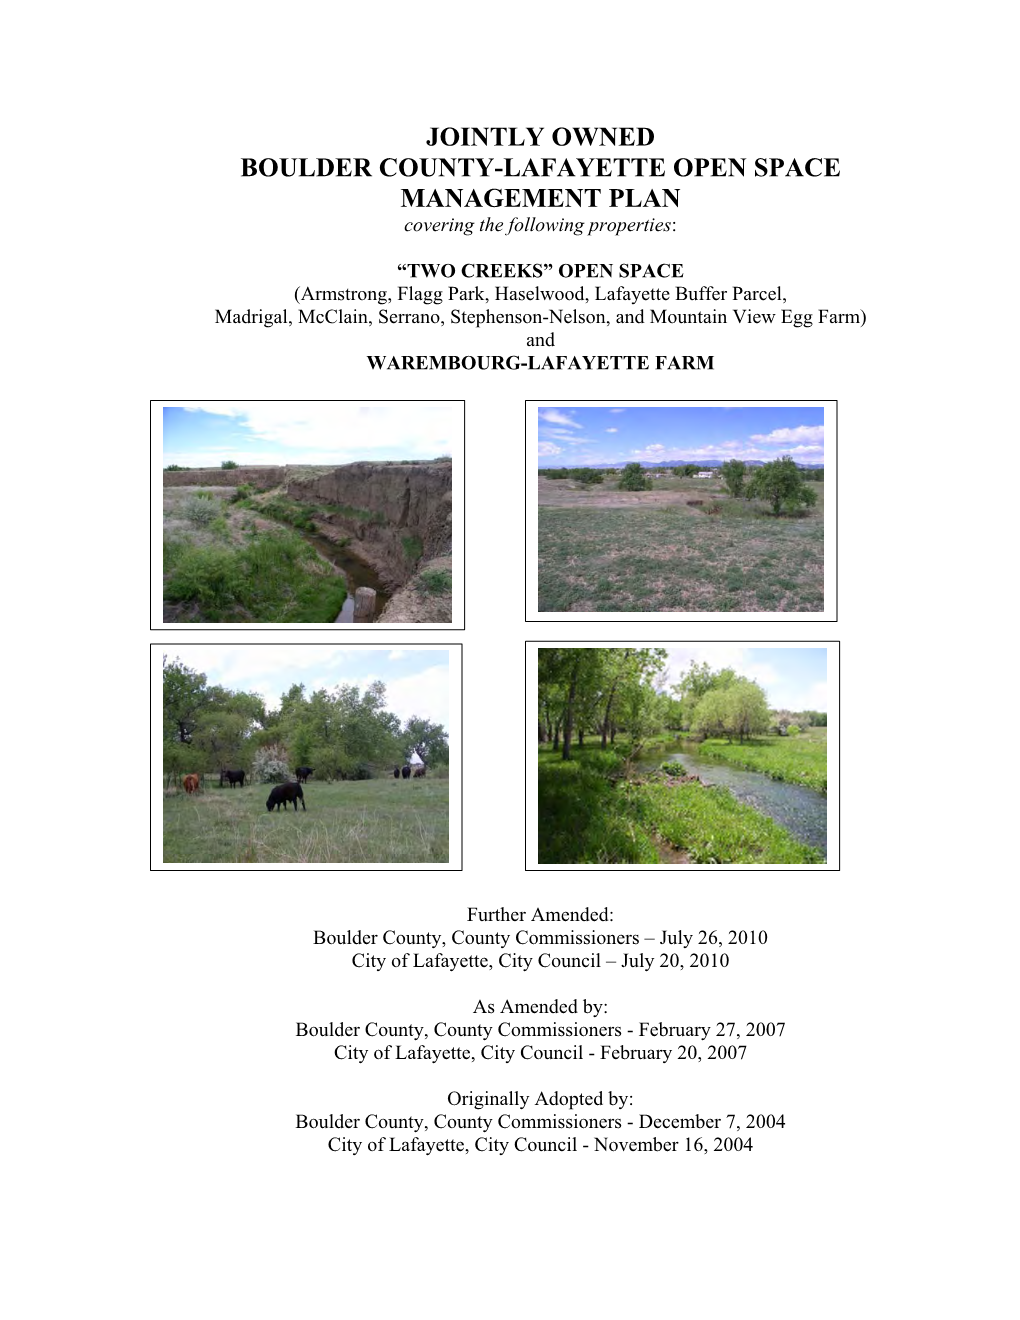 JOINTLY OWNED BOULDER COUNTY-LAFAYETTE OPEN SPACE MANAGEMENT PLAN Covering the Following Properties